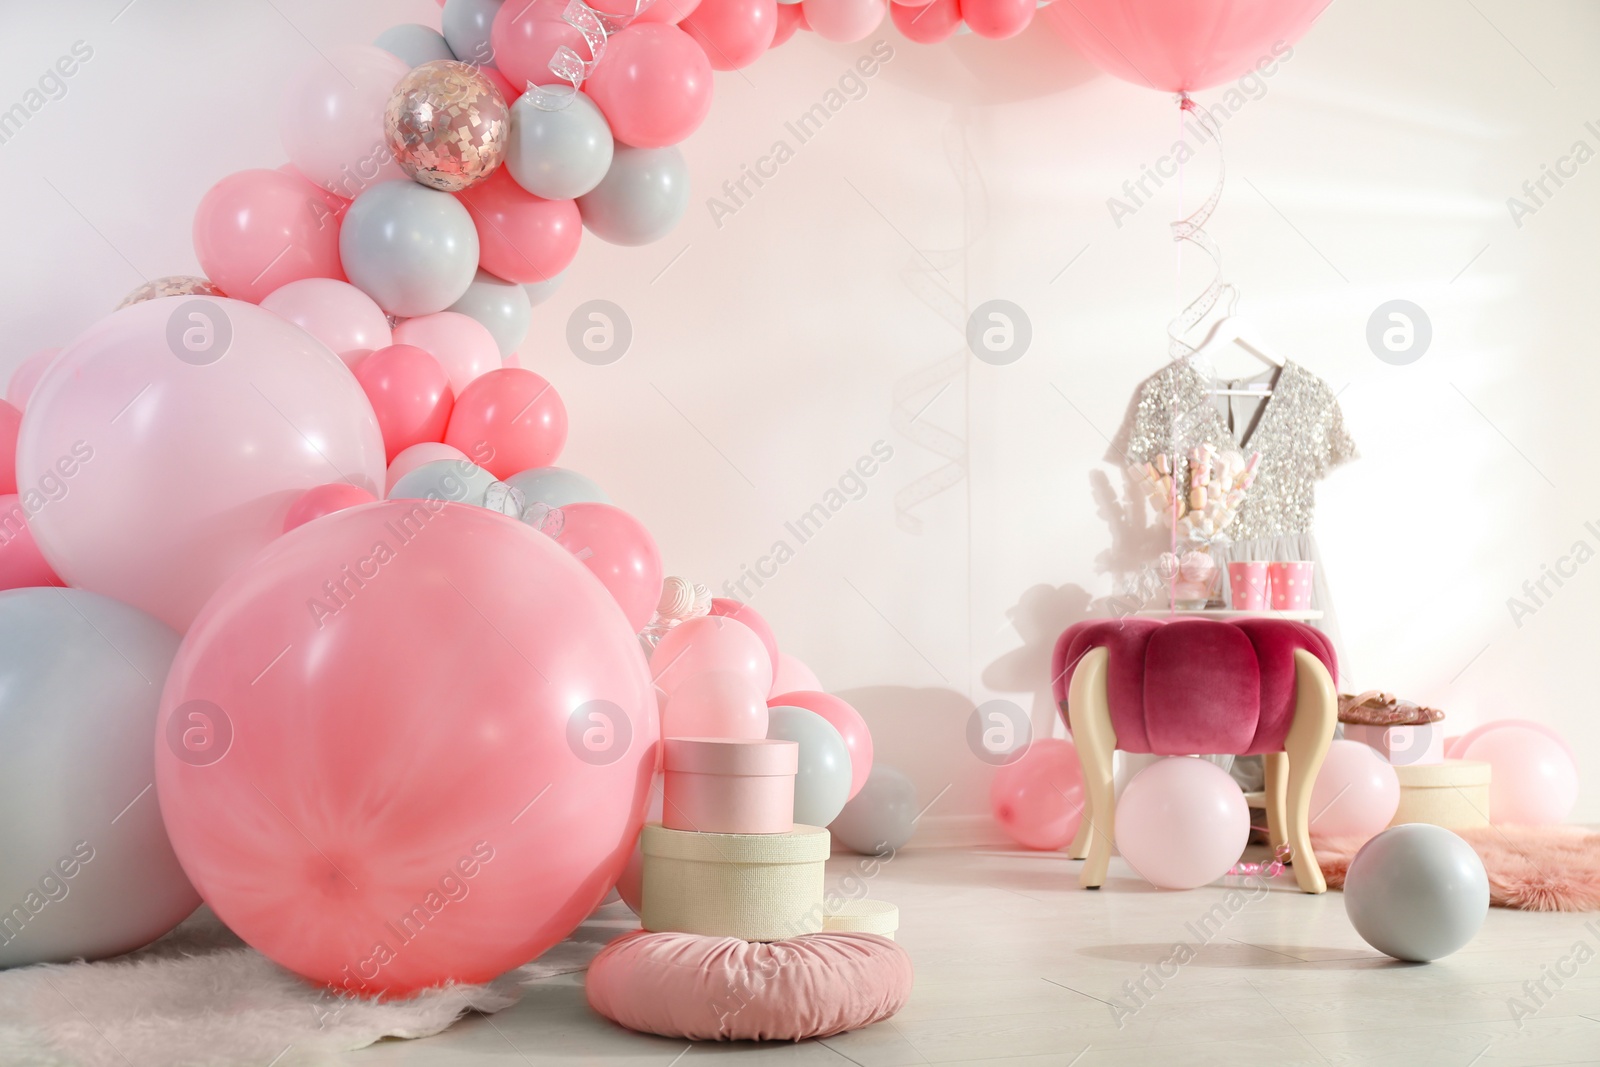 Photo of Room decorated with colorful balloons for party